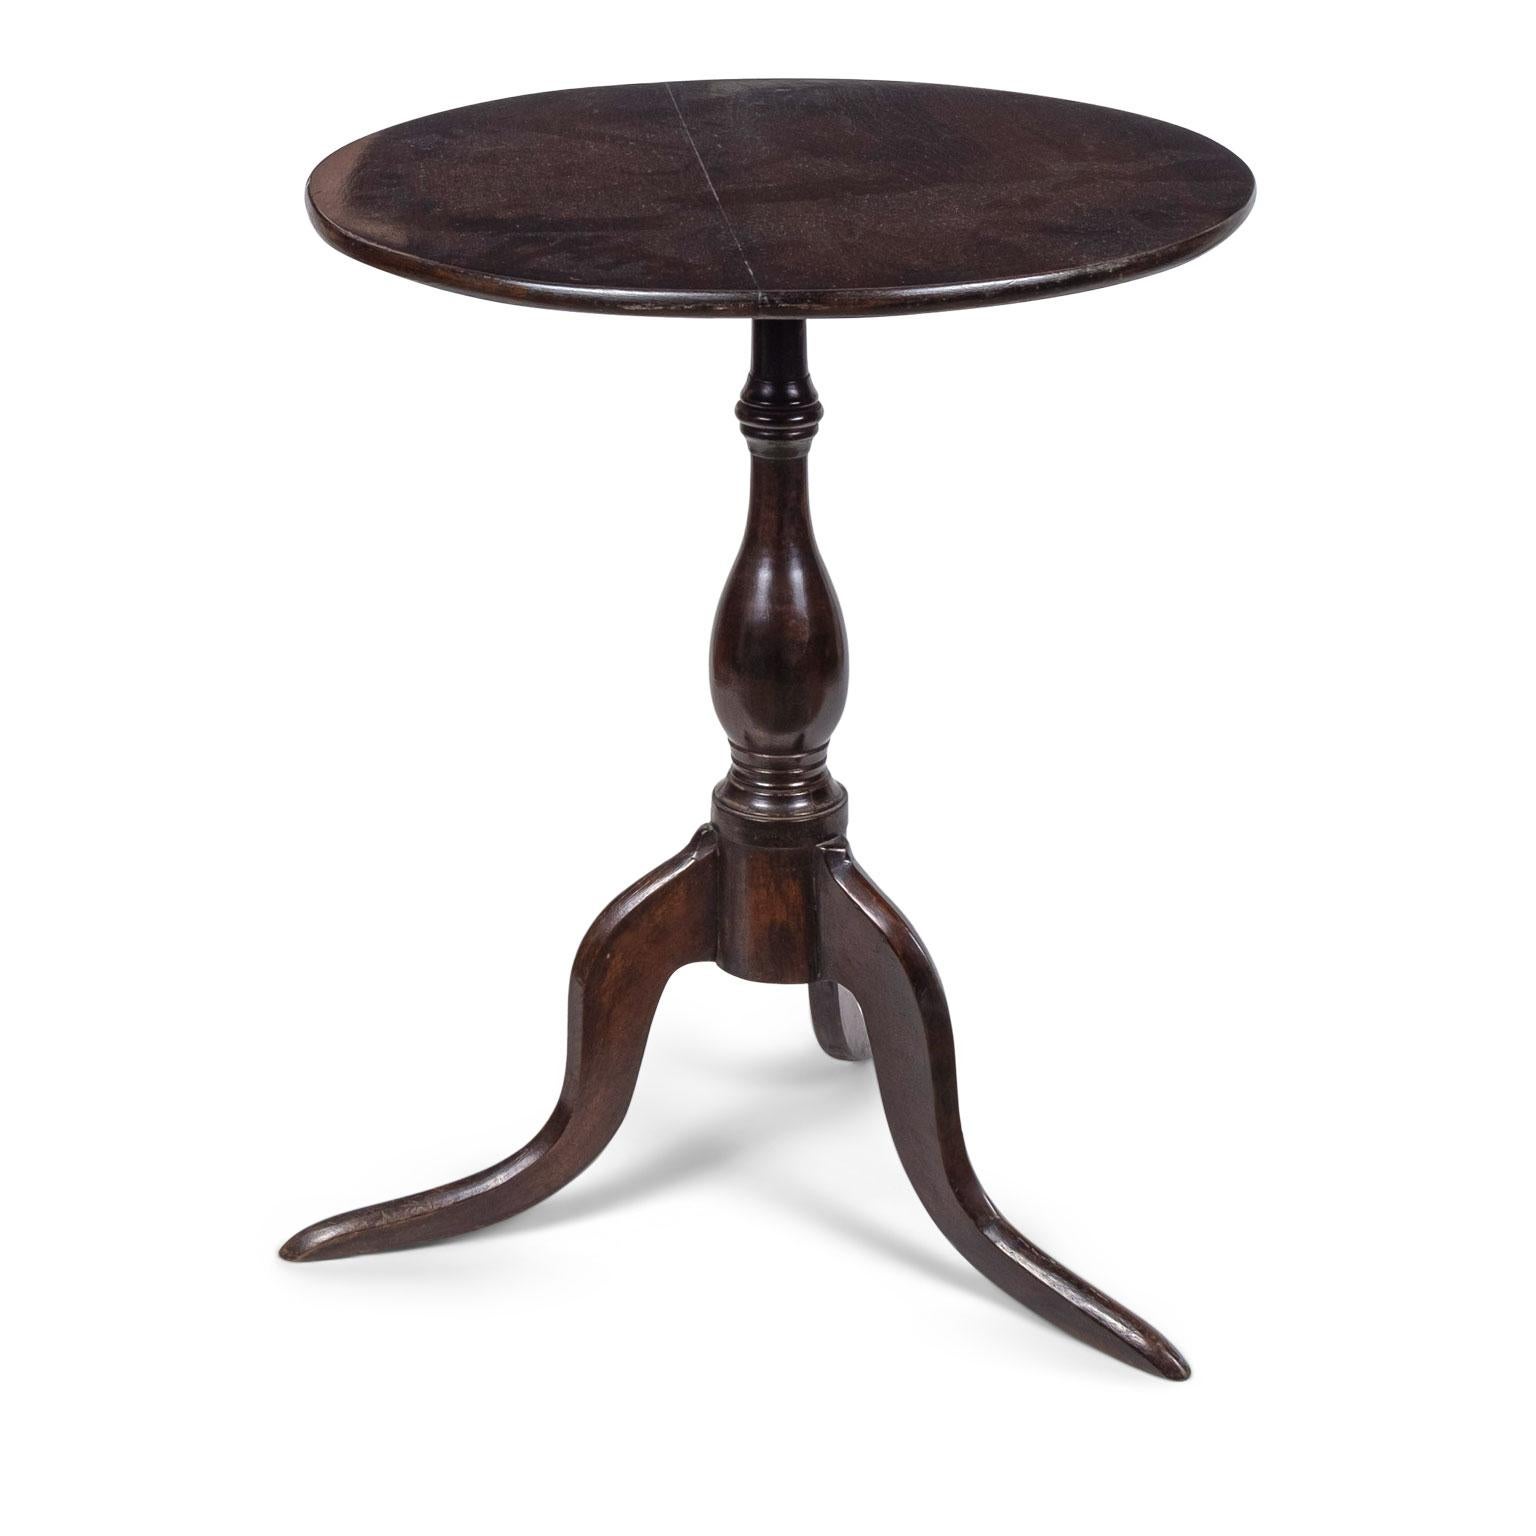 Black walnut tilt-top side table with oak top: American Chippendale style side table from the Southern United States, (circa 1775-1800). Evidence of repairs and restoration in the 19th and 20th centuries. Believed to have originated in South